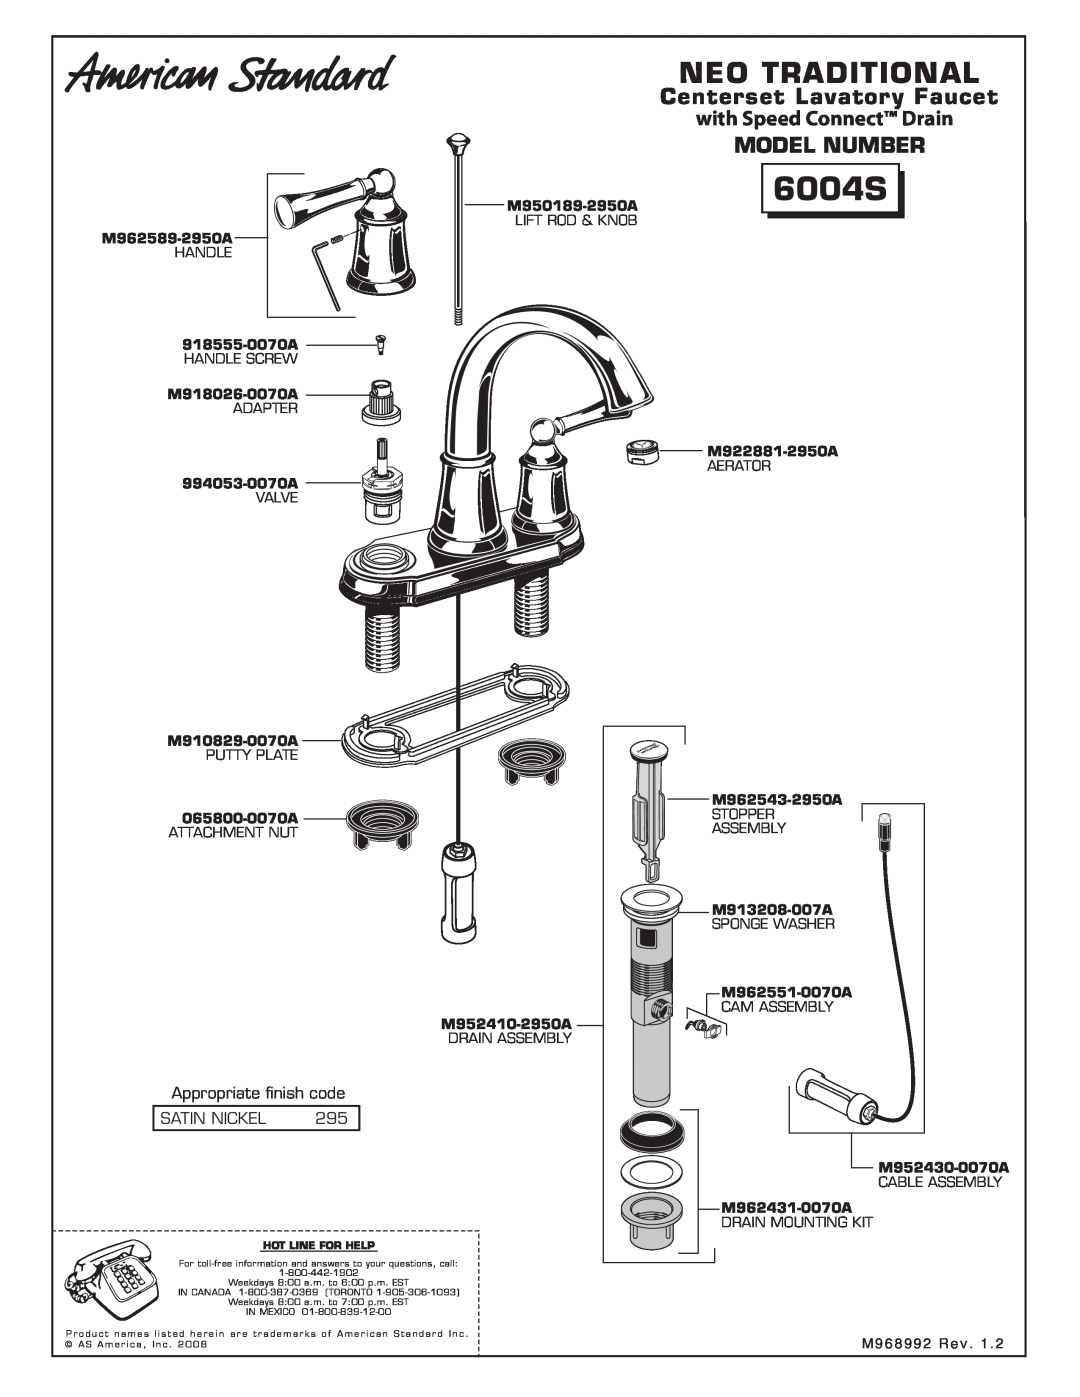 American Standard 6004S manual Neo Traditional, Centerset Lavatory Faucet, with Speed Connect Drain MODEL NUMBER 